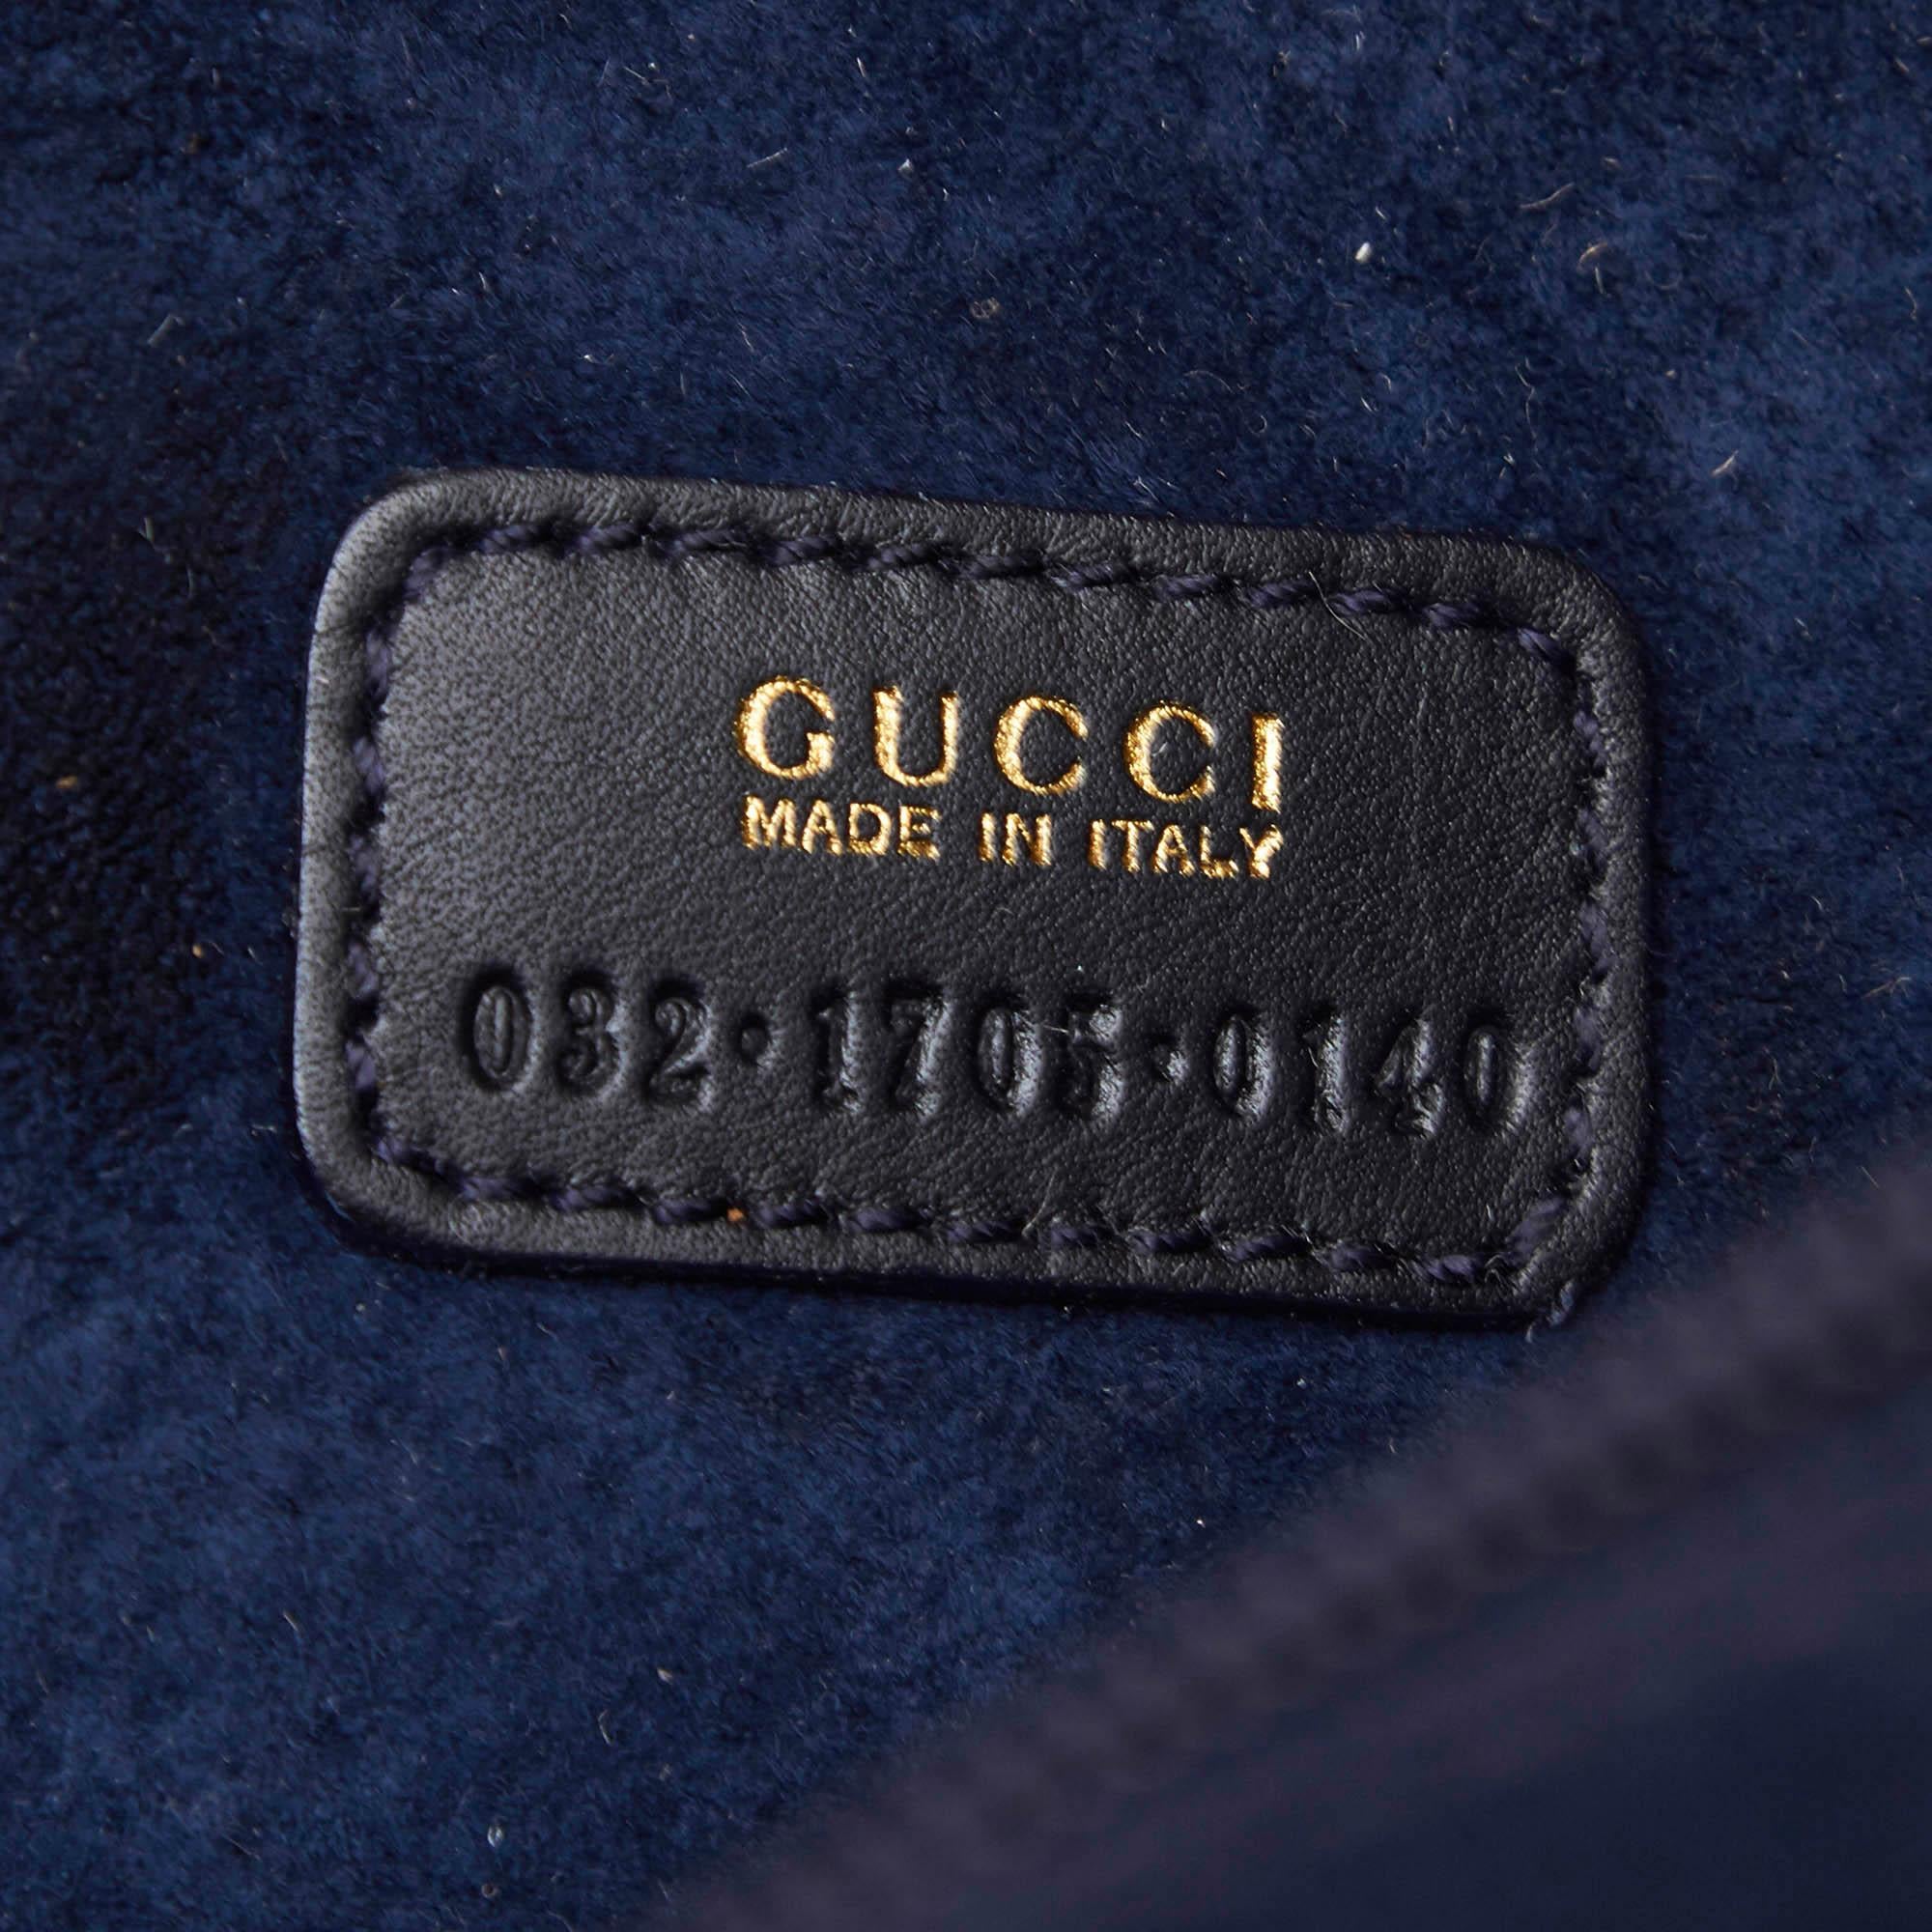 Vintage Authentic Gucci Blue Navy Suede Leather Horsebit Vanity Bag ITALY SMALL  For Sale 1